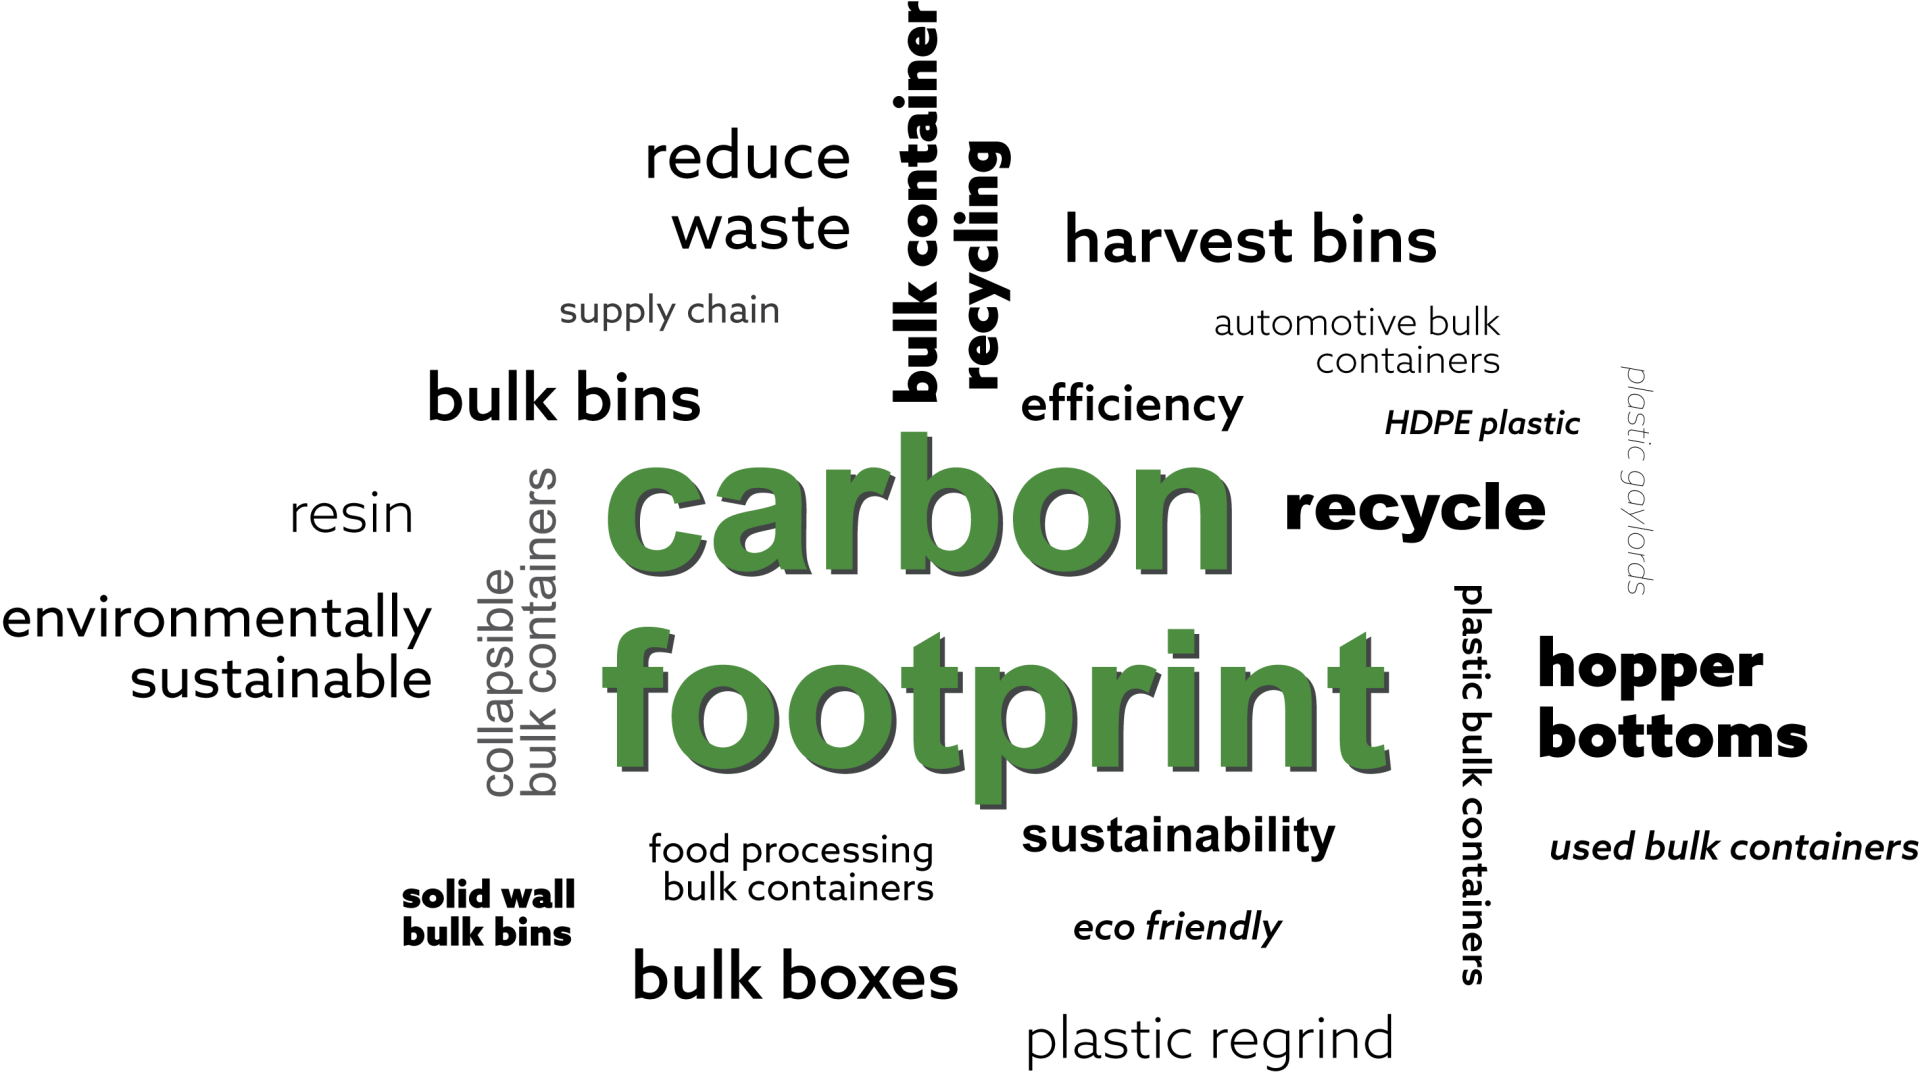 reduce carbon footprint with collapsible plastic bulk containers